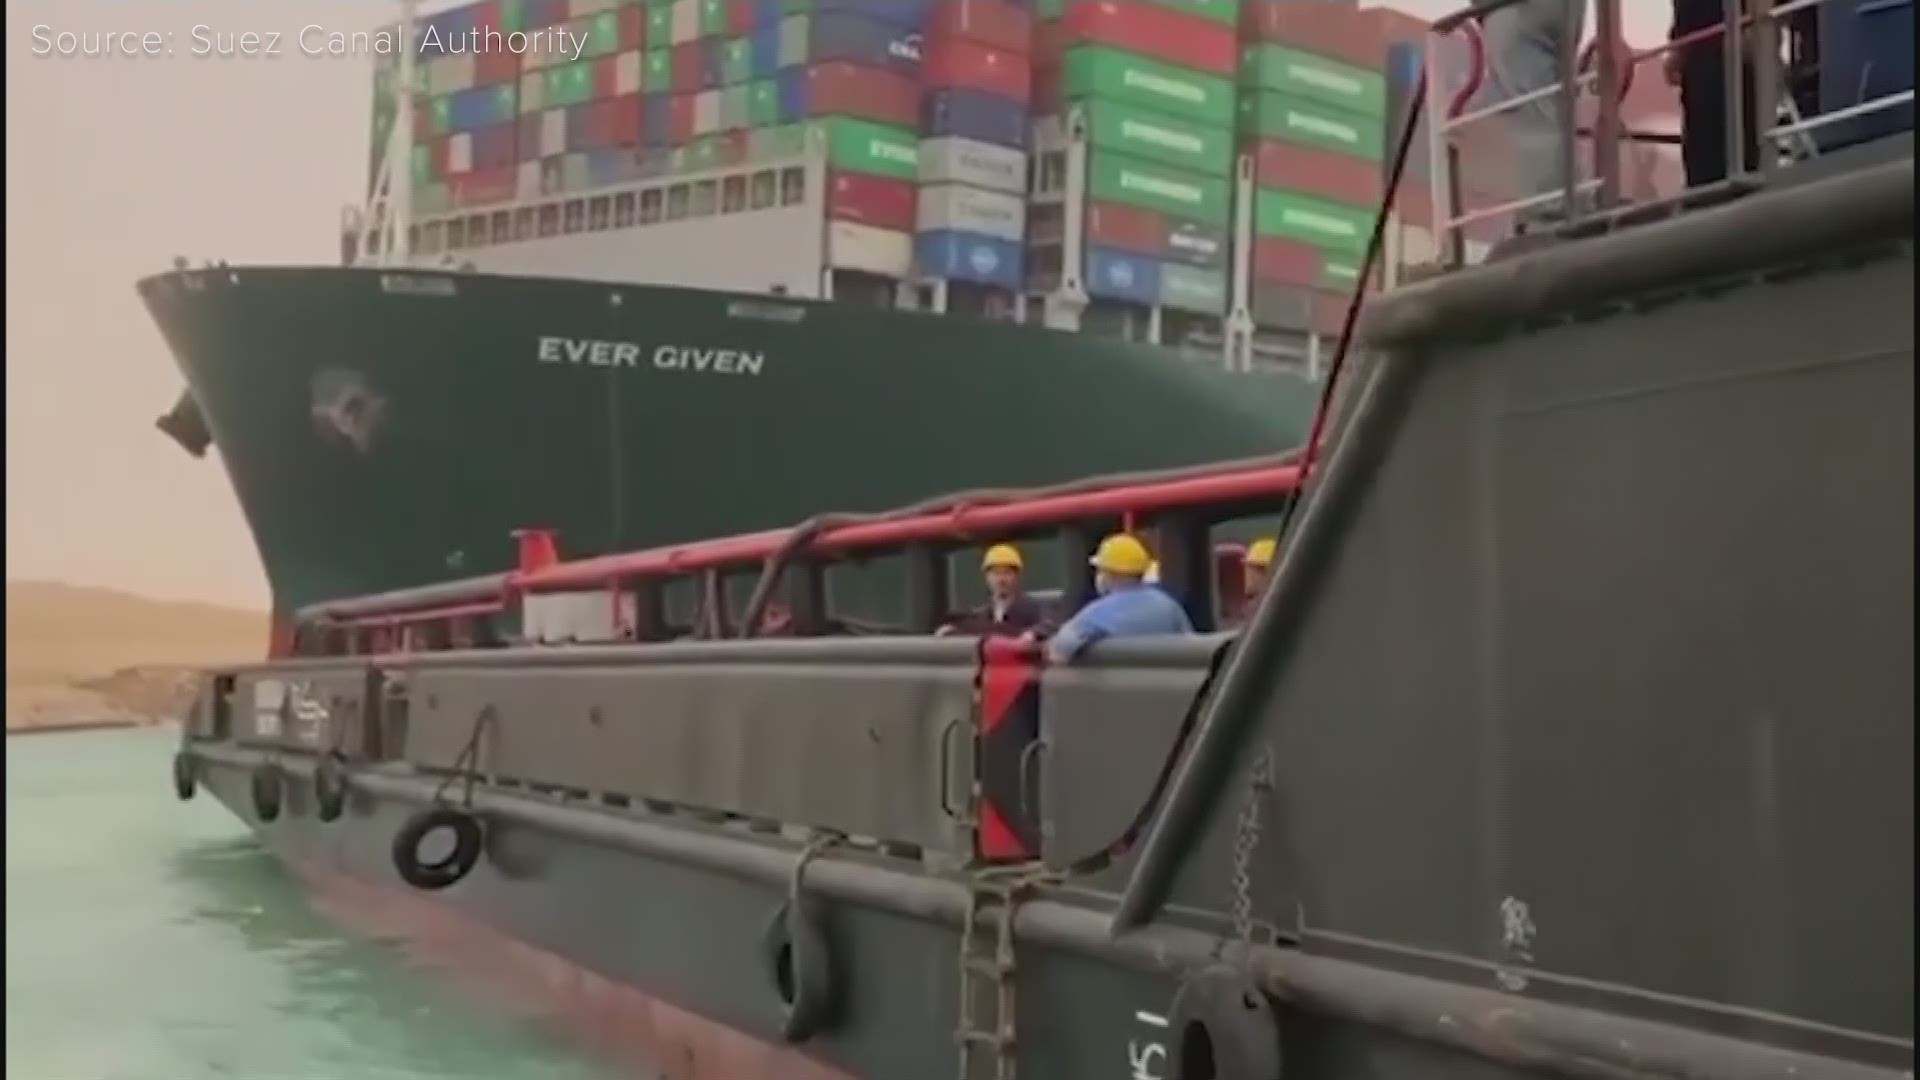 A skyscraper-sized container ship has become wedged across Egypt's Suez Canal and blocked all traffic in the vital waterway.